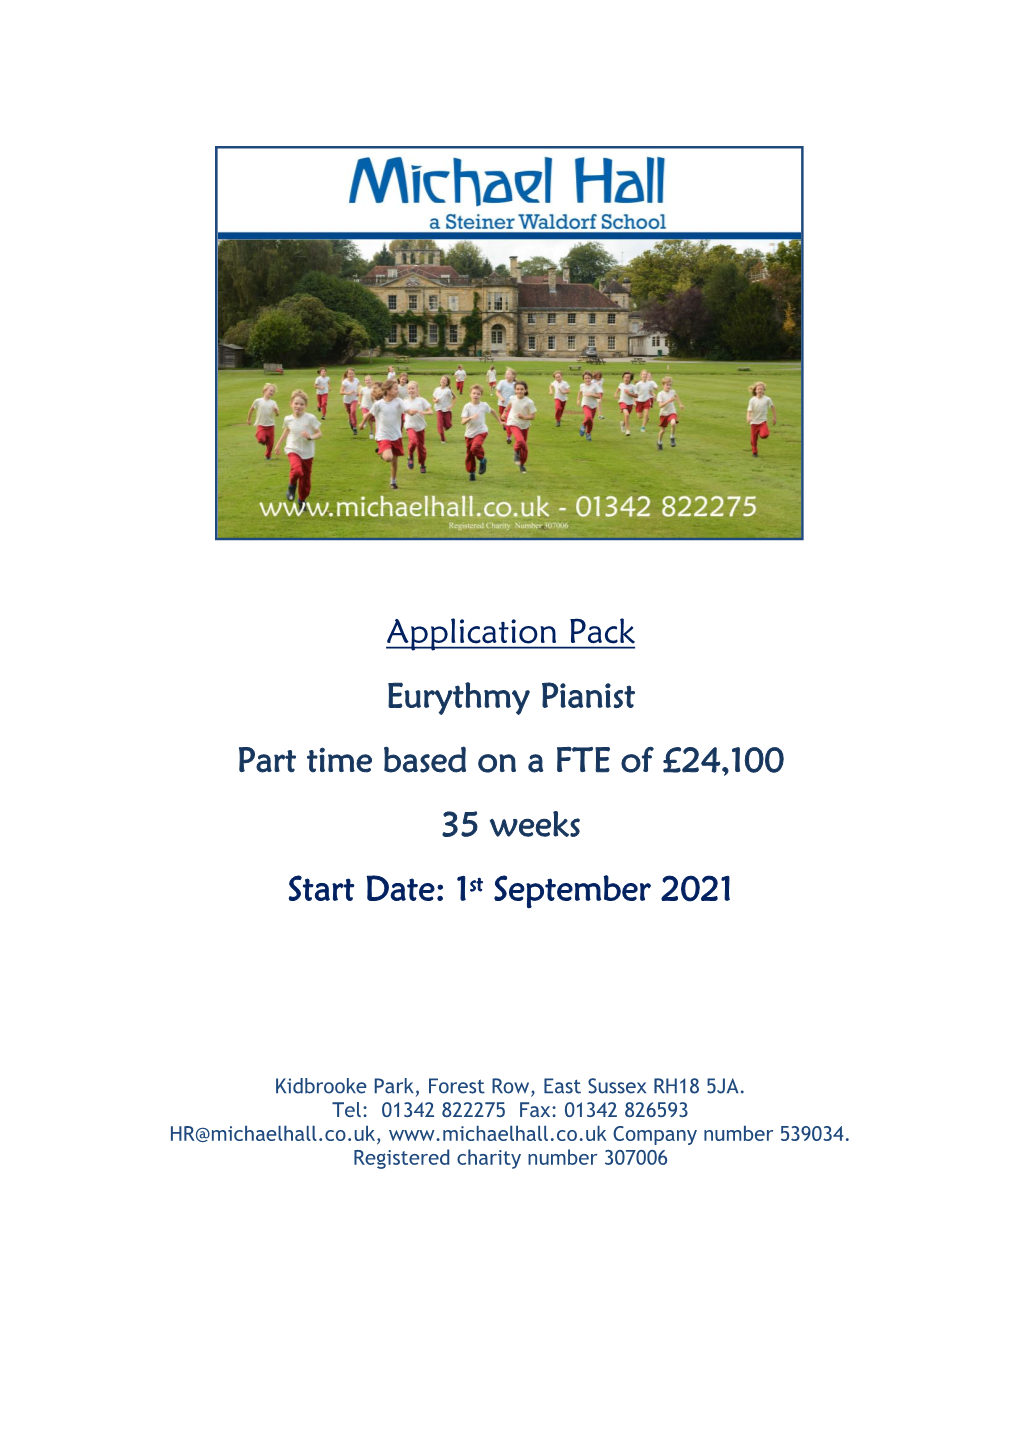 Application Pack Eurythmy Pianist Part Time Based on a FTE of £24,100 35 Weeks